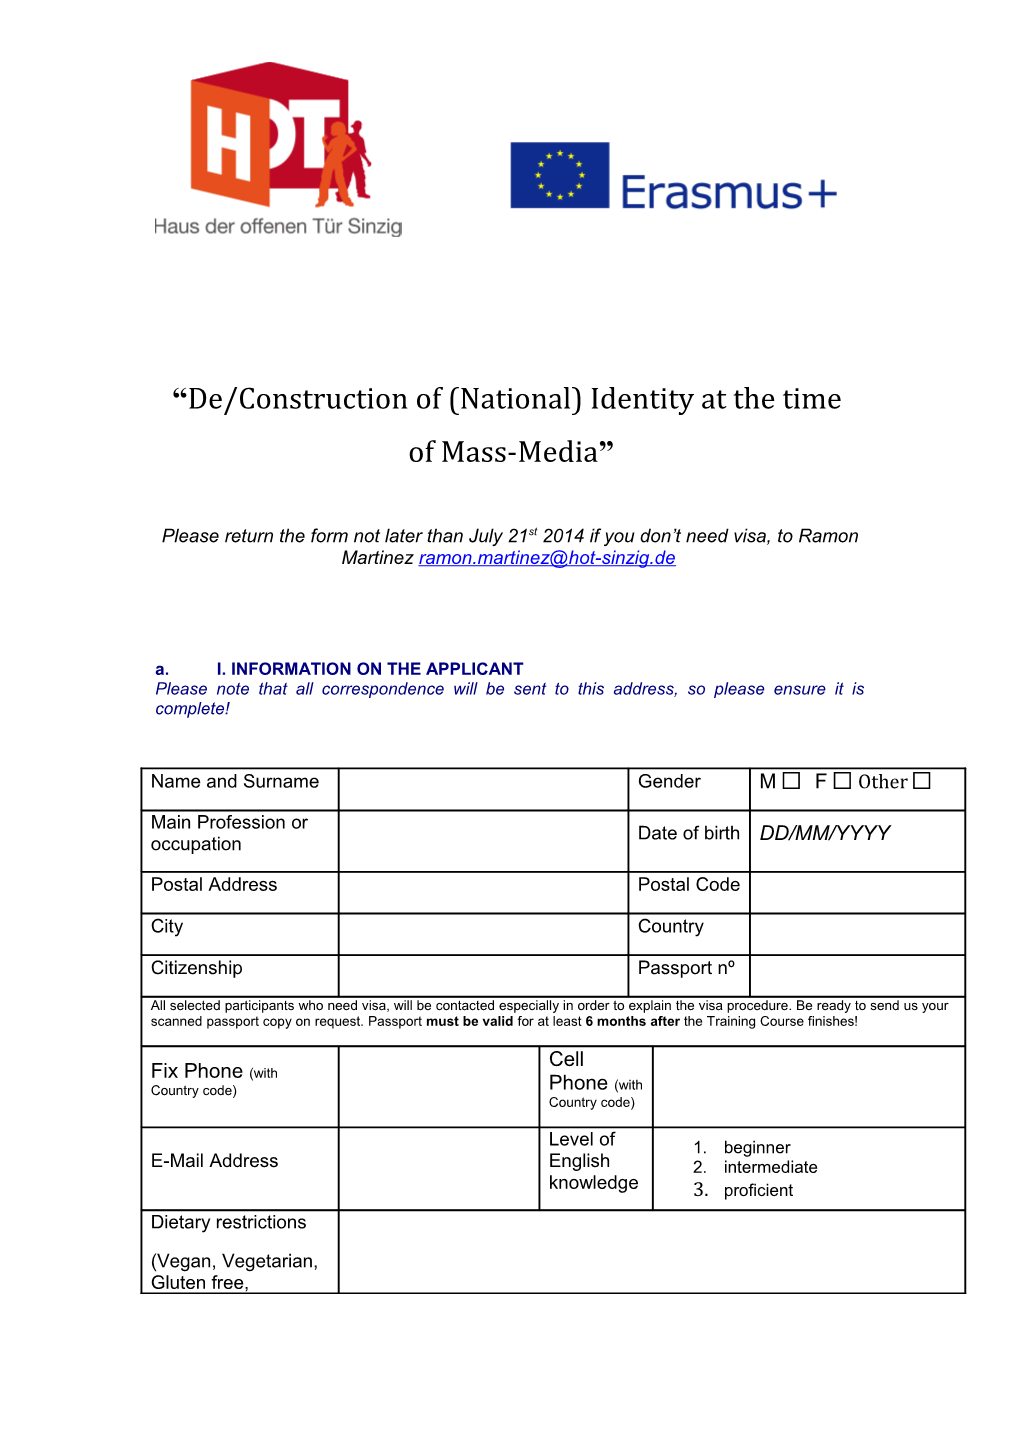 De/Construction of (National) Identity at the Time